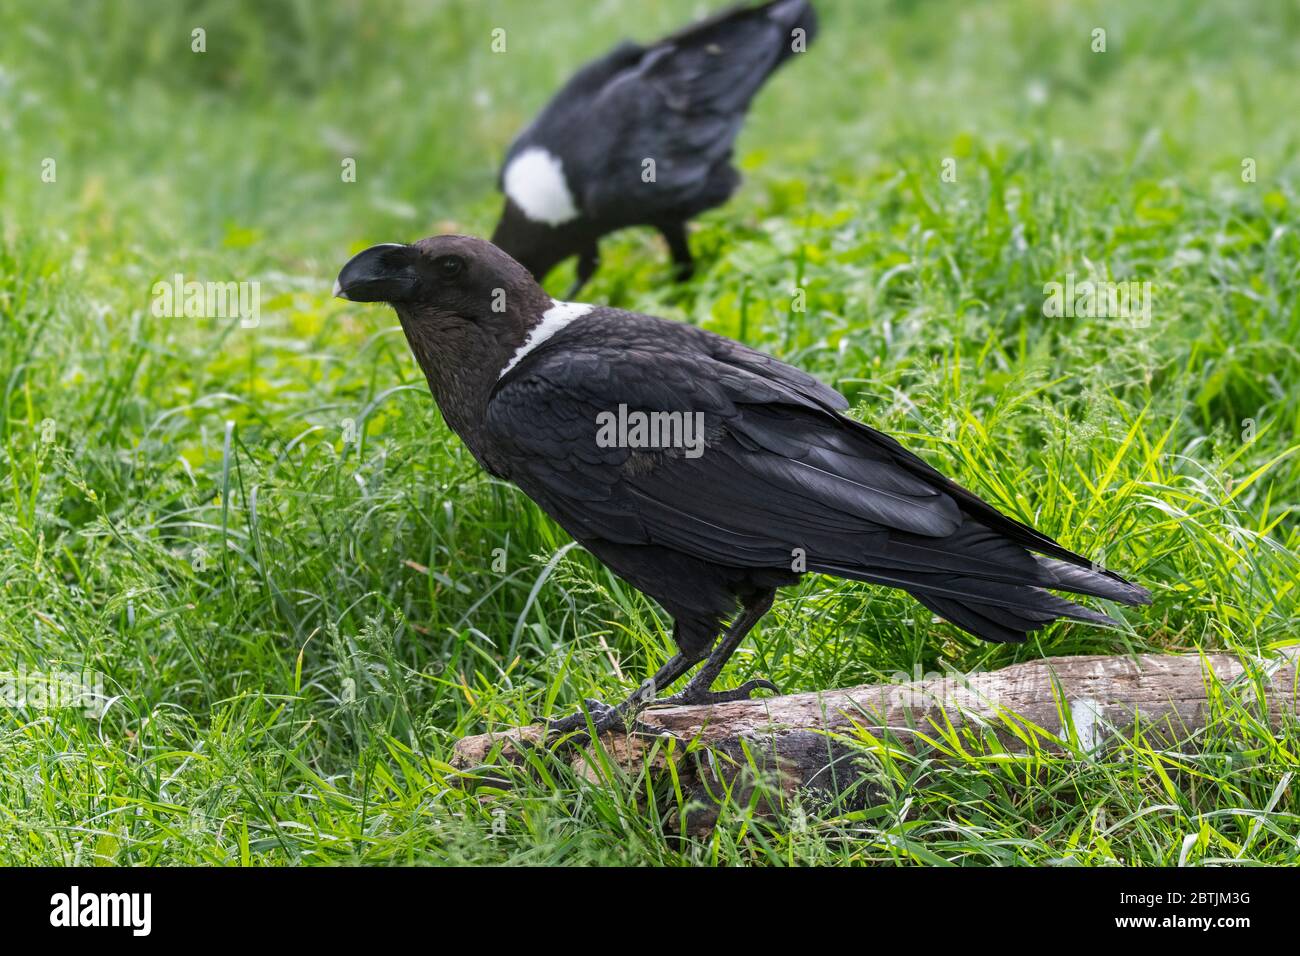 Thick-billed raven (Corvus crassirostris), corvid from the Horn of Africa Stock Photo